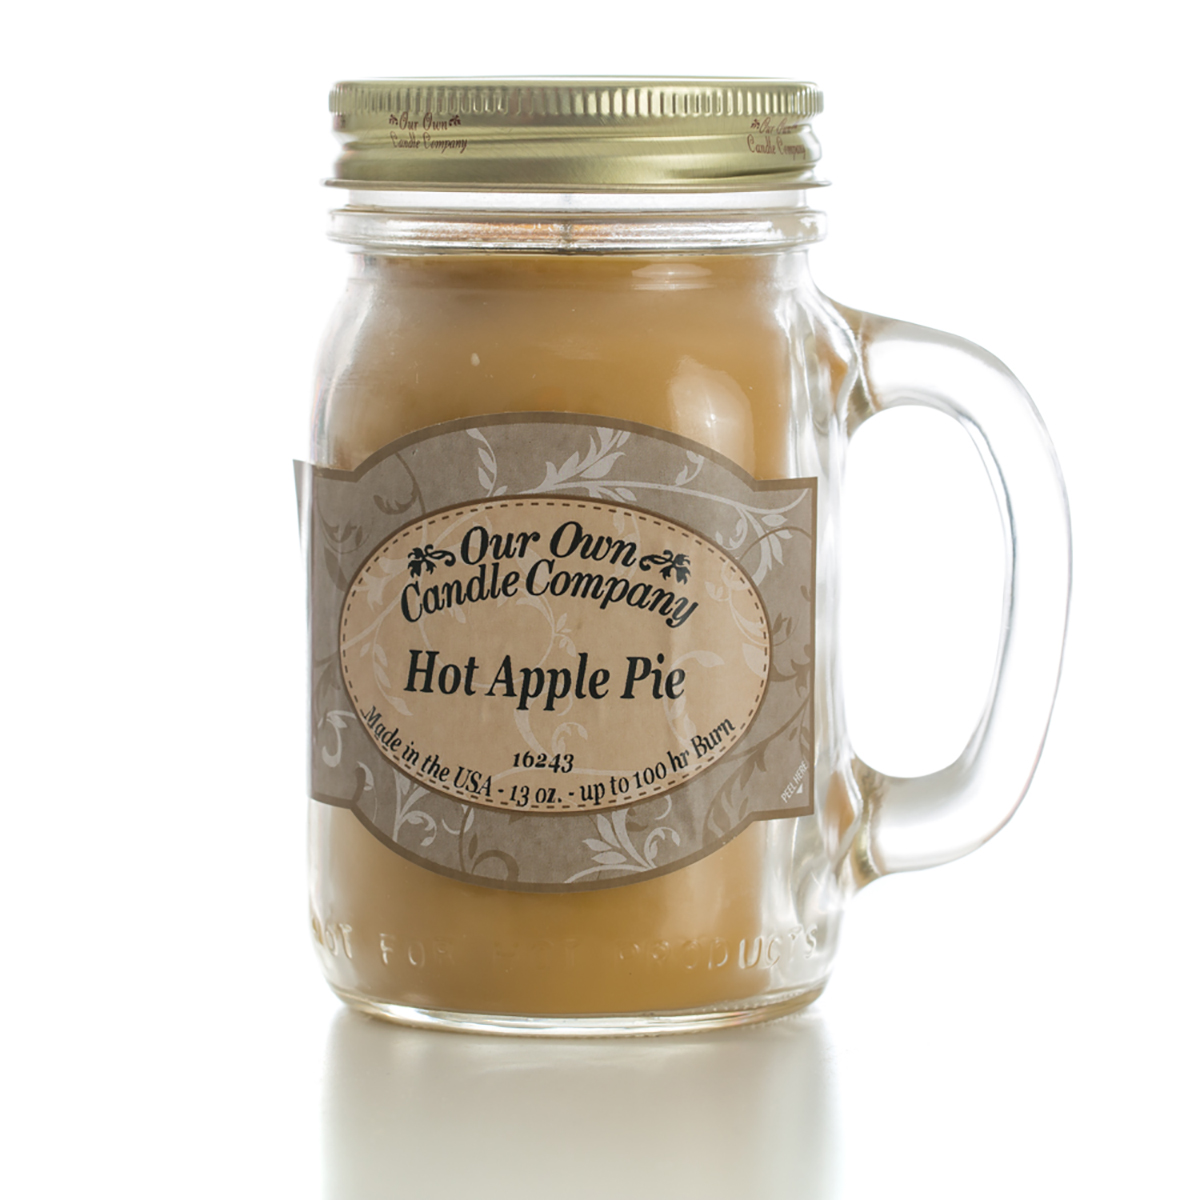 Our Own Candle Company Hot Apple Pie 13oz.  Mason Jar Candle